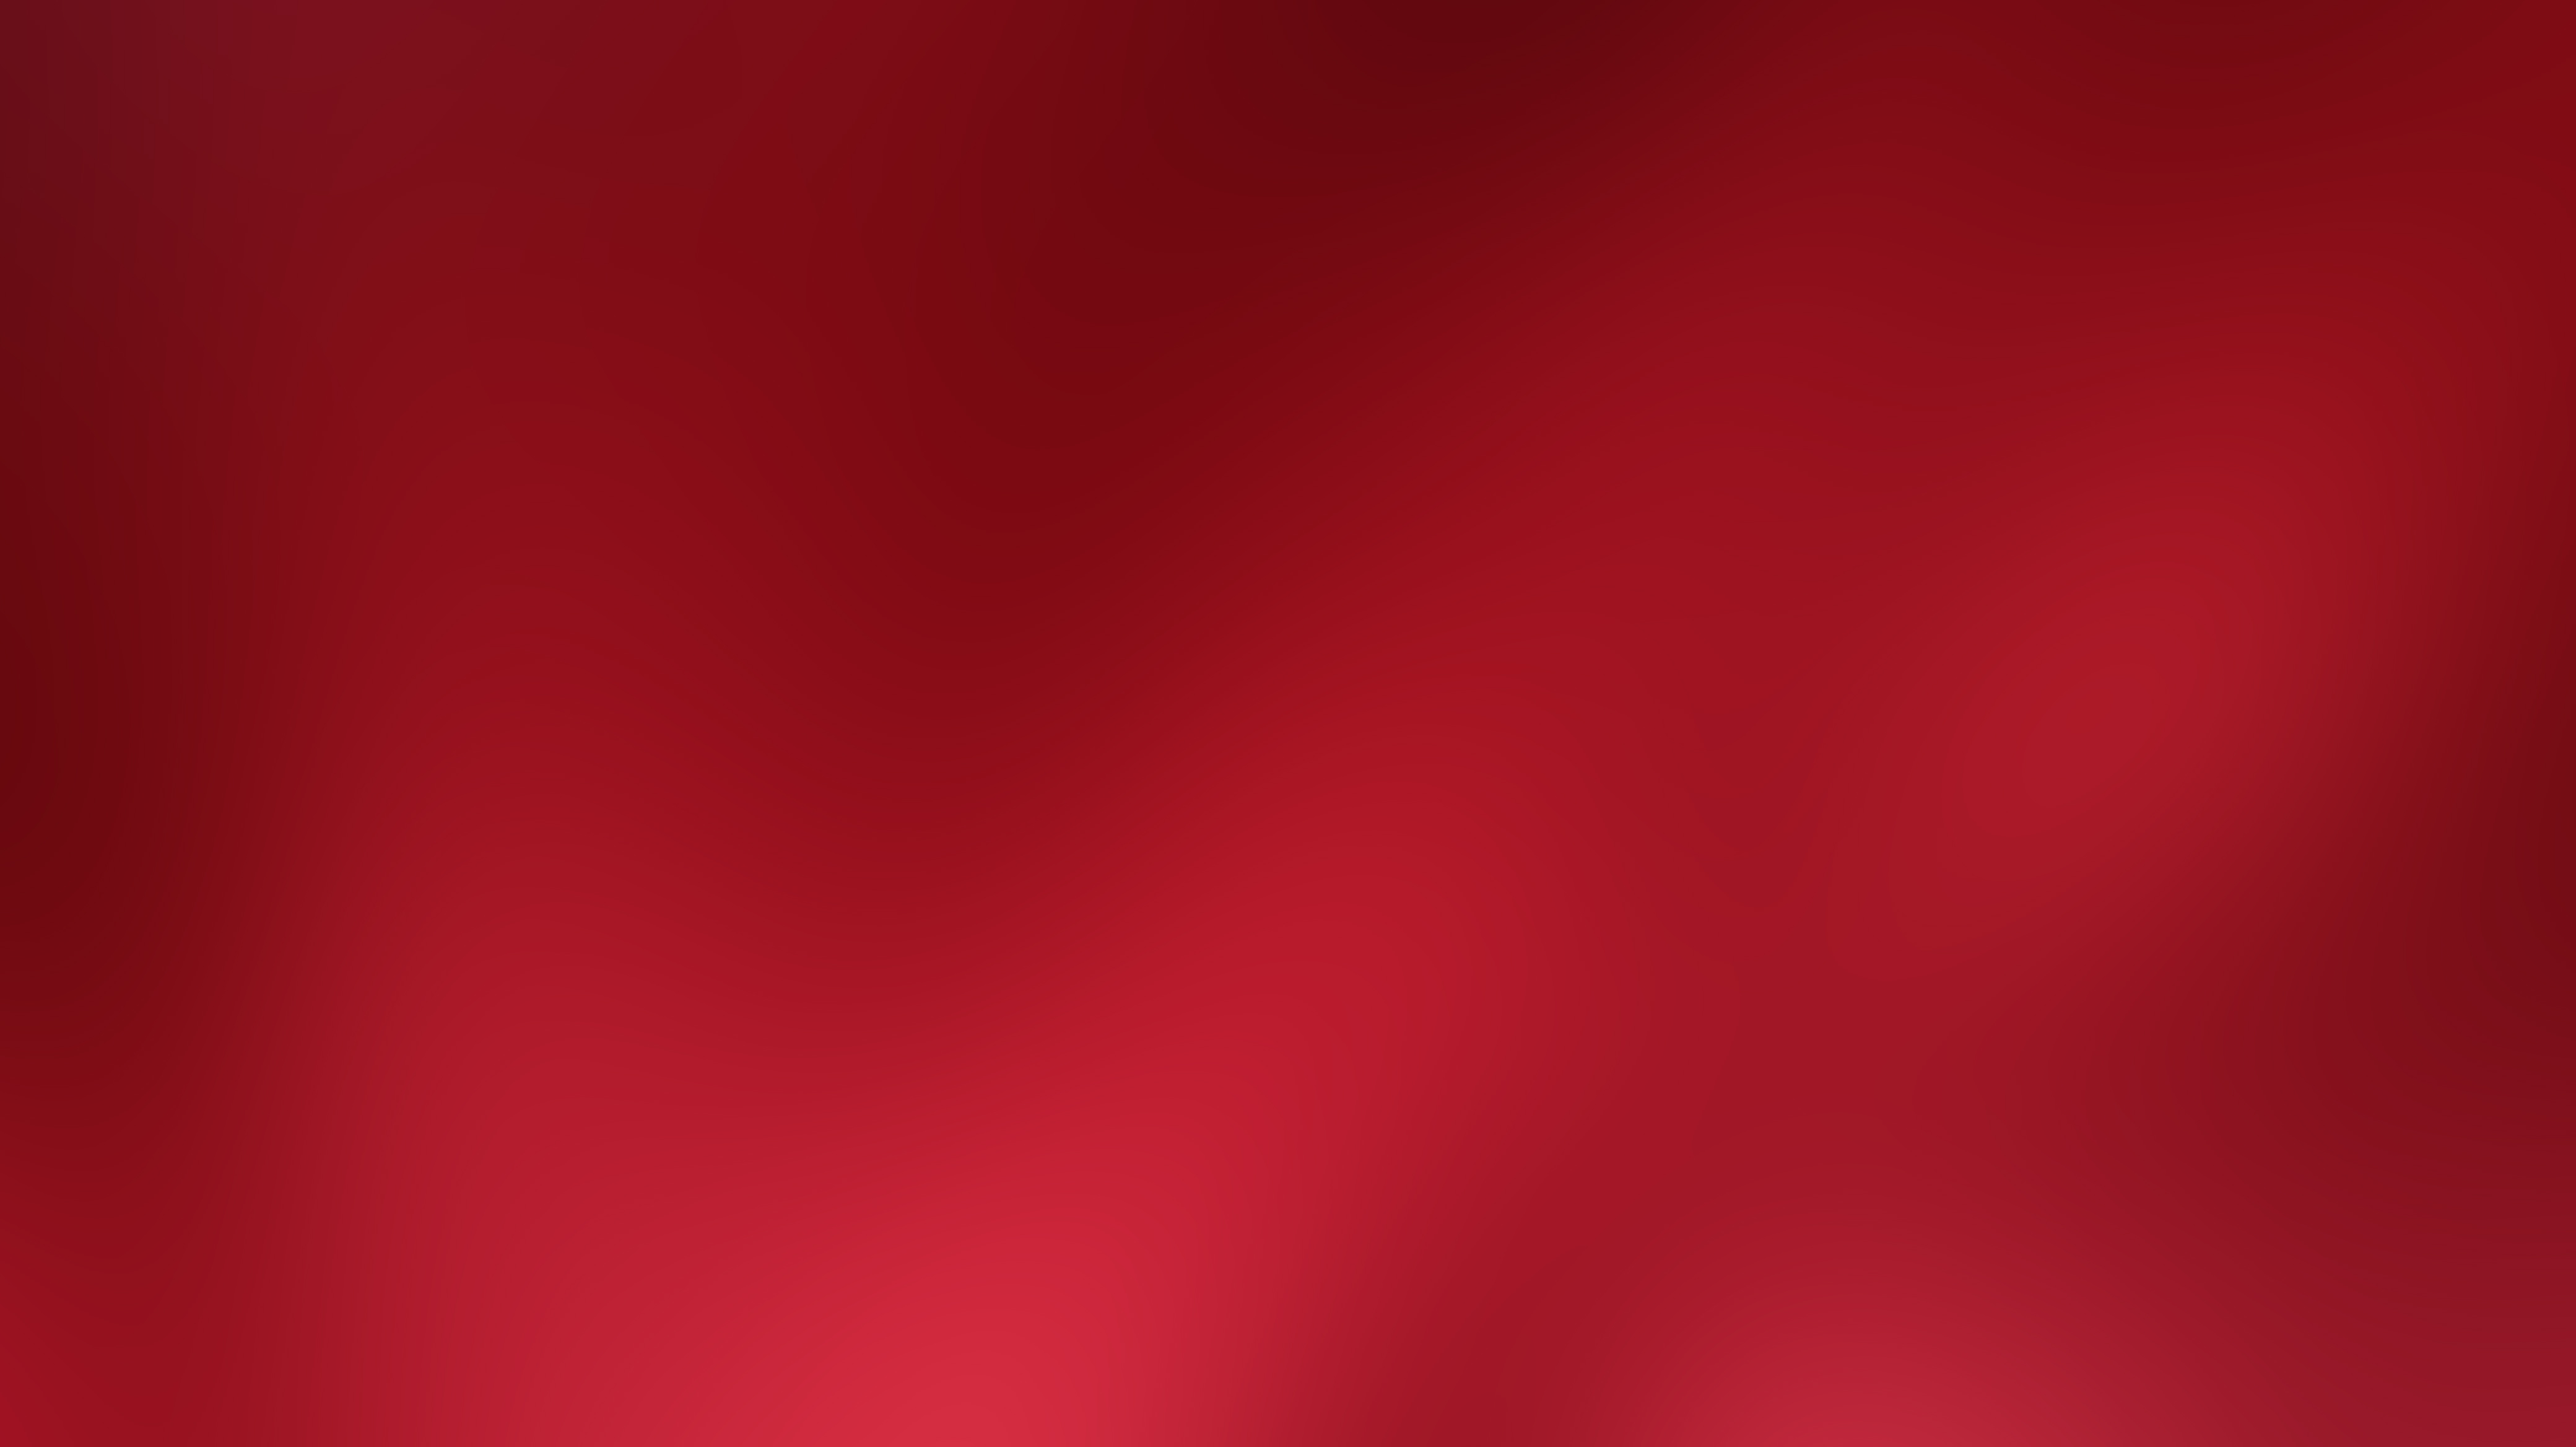 Red Gradient Background Stock Photos, Images and Backgrounds for ...